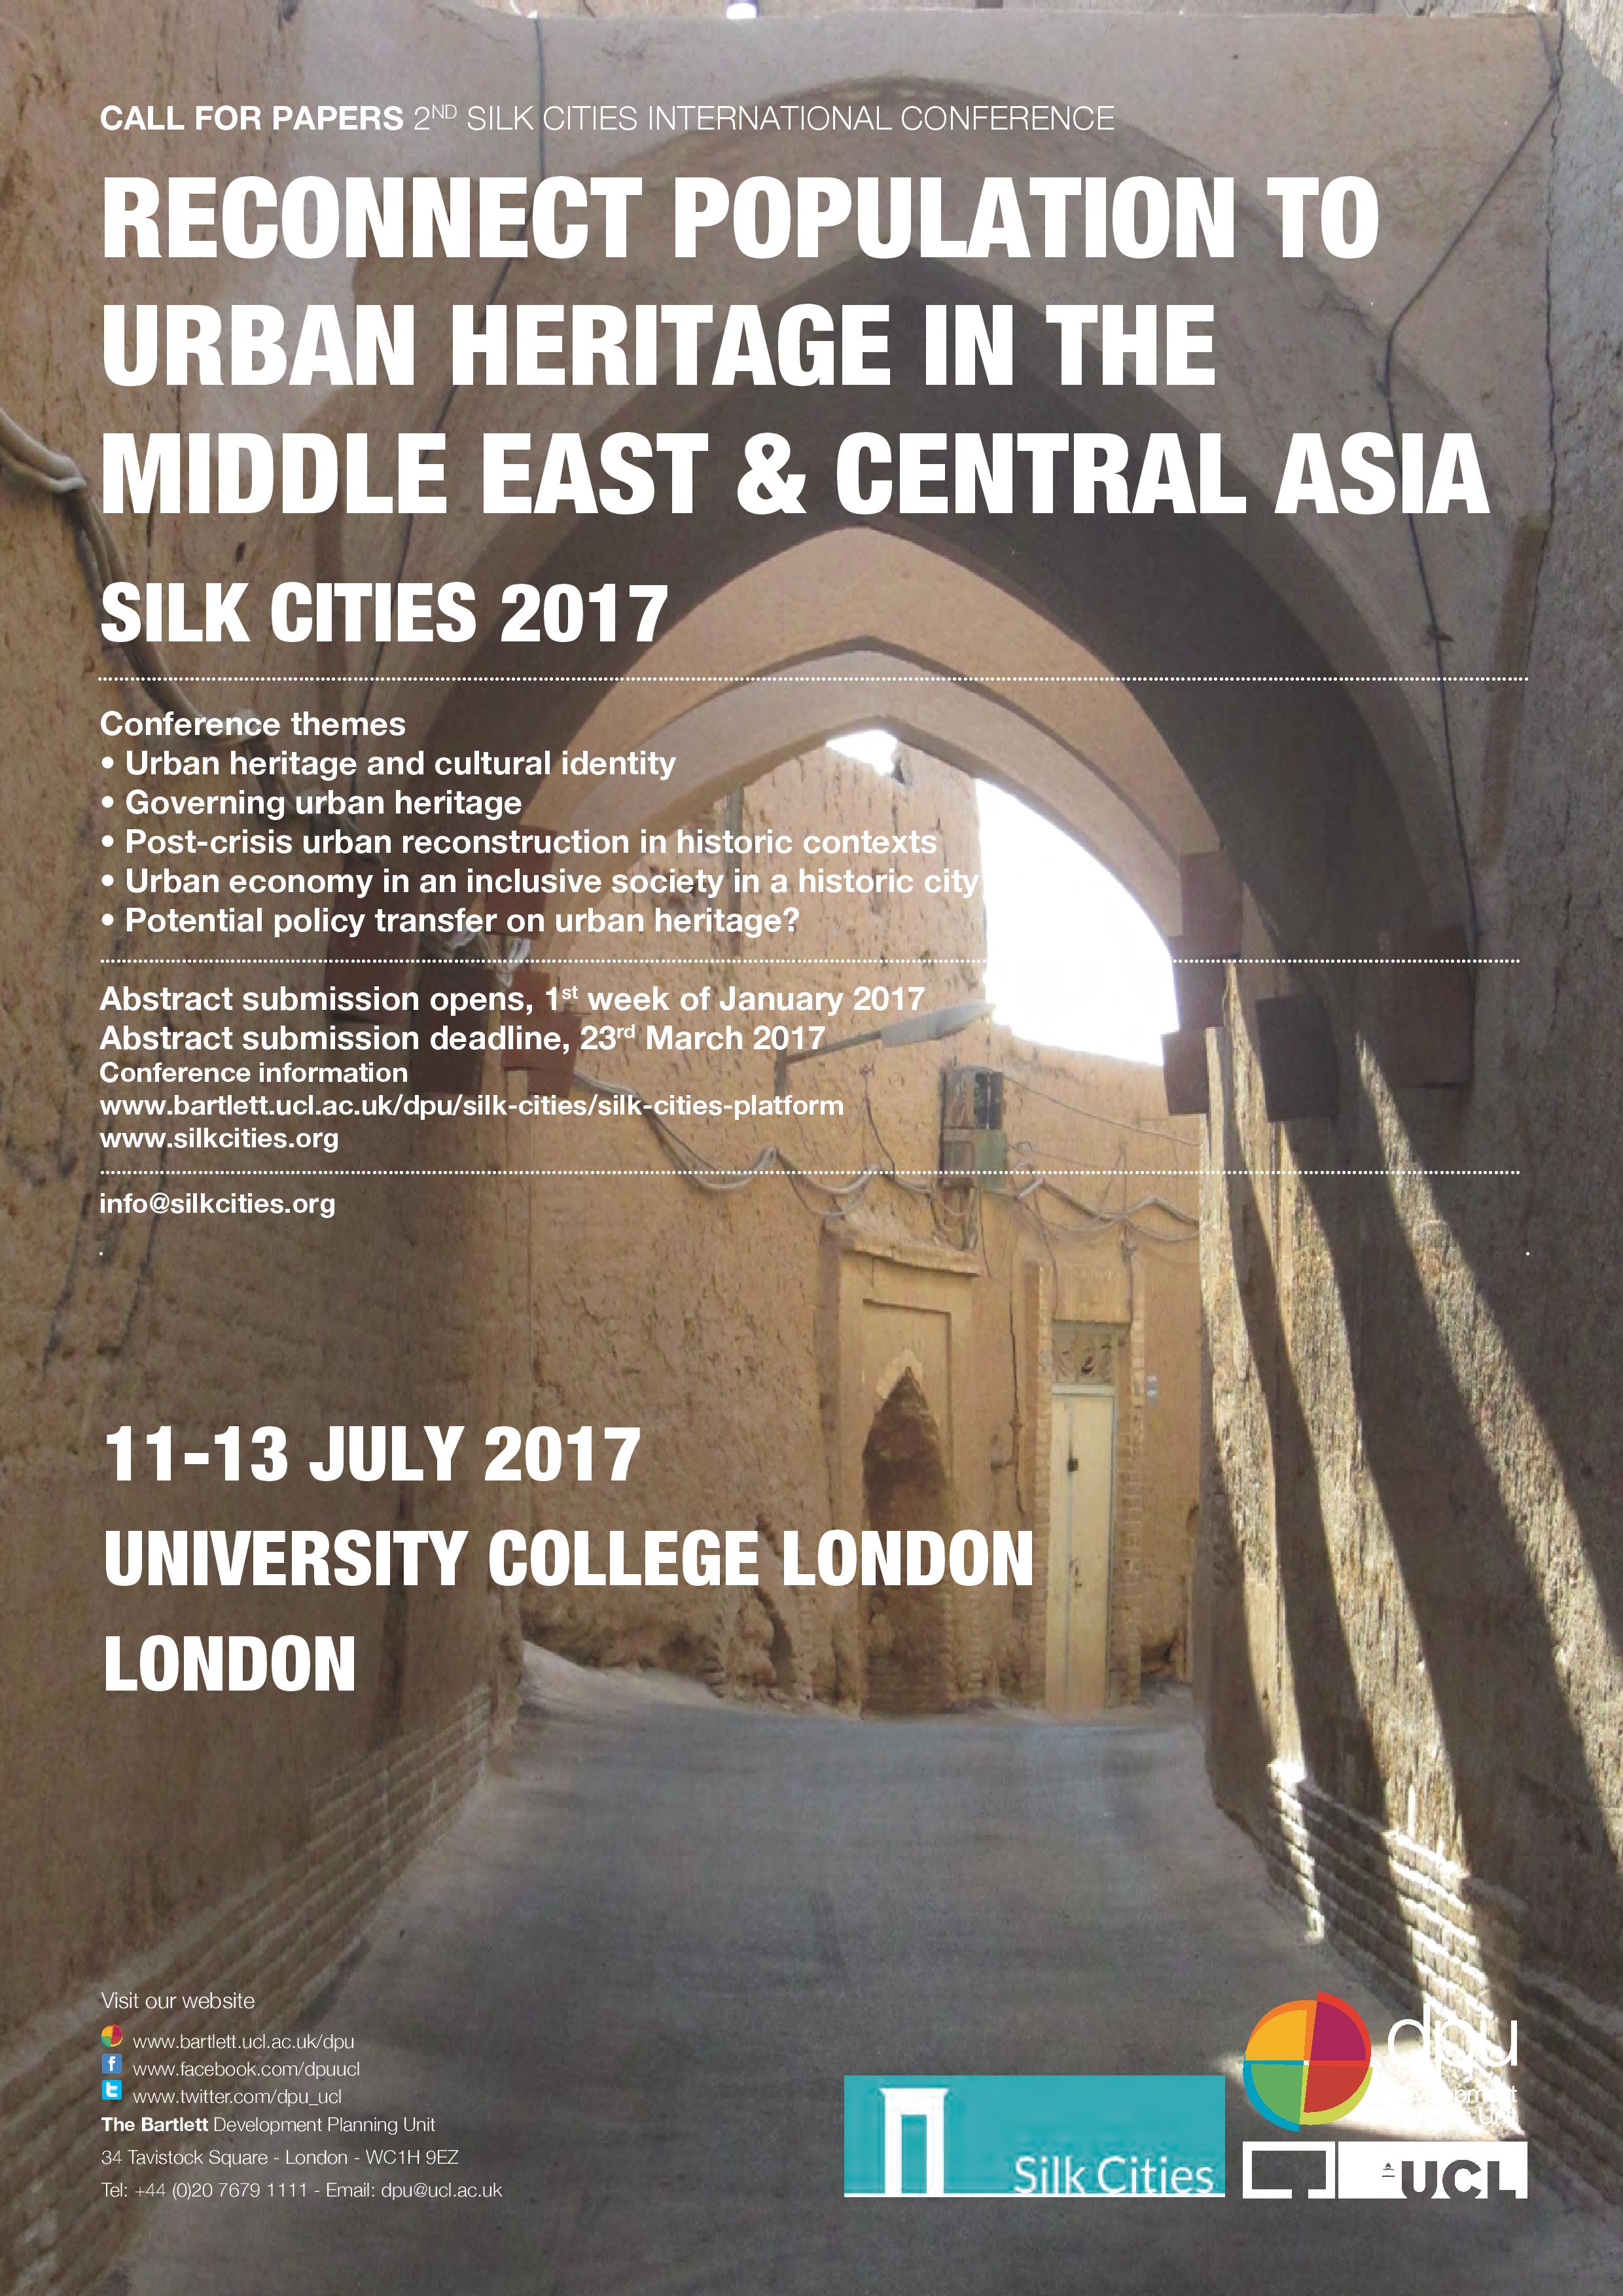 The conference aims to bring researchers, practitioners to explore the discourse of this interruption and how to reconnect population to their urban cultural heritage in the Middle East and Central Asia to address urgent regional cases.